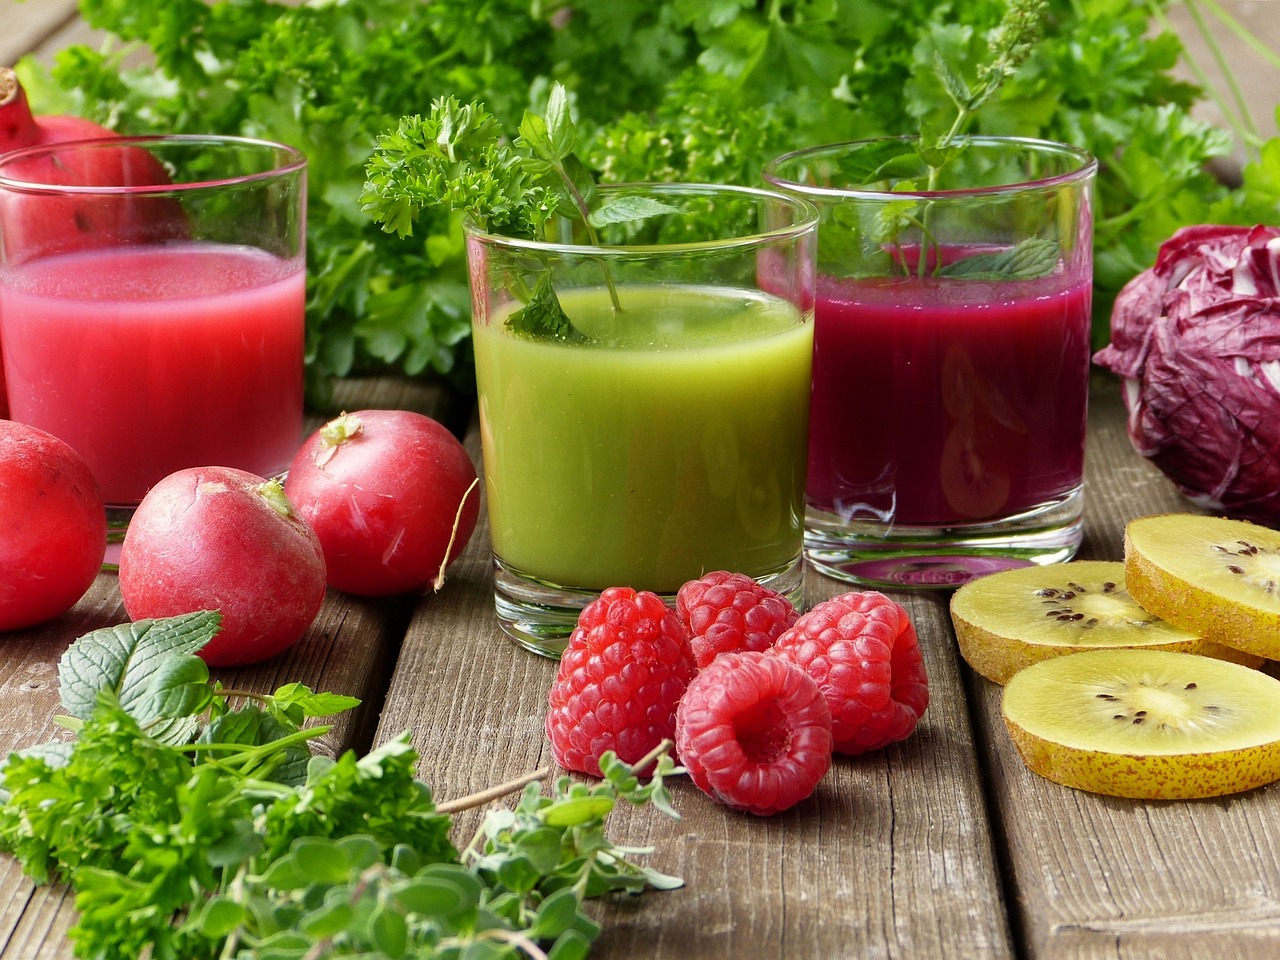 Image of fruits, vegetables and juices.